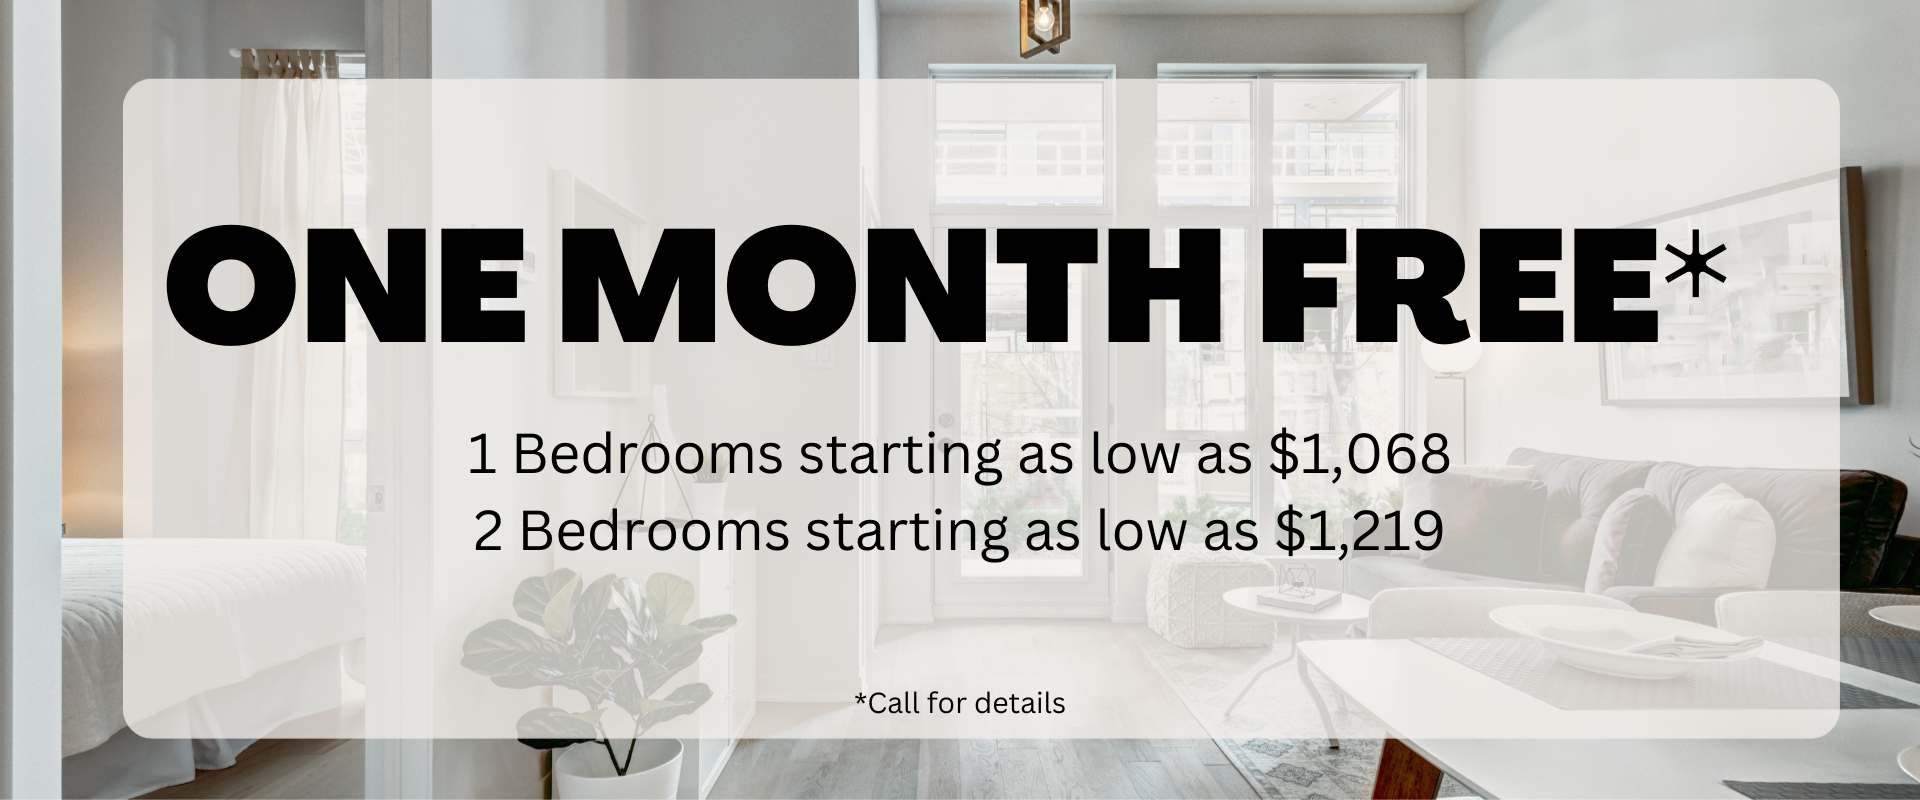 ONE MONTH FREE  1BDR as low as $1,068, 2 BDR as low as $1,219